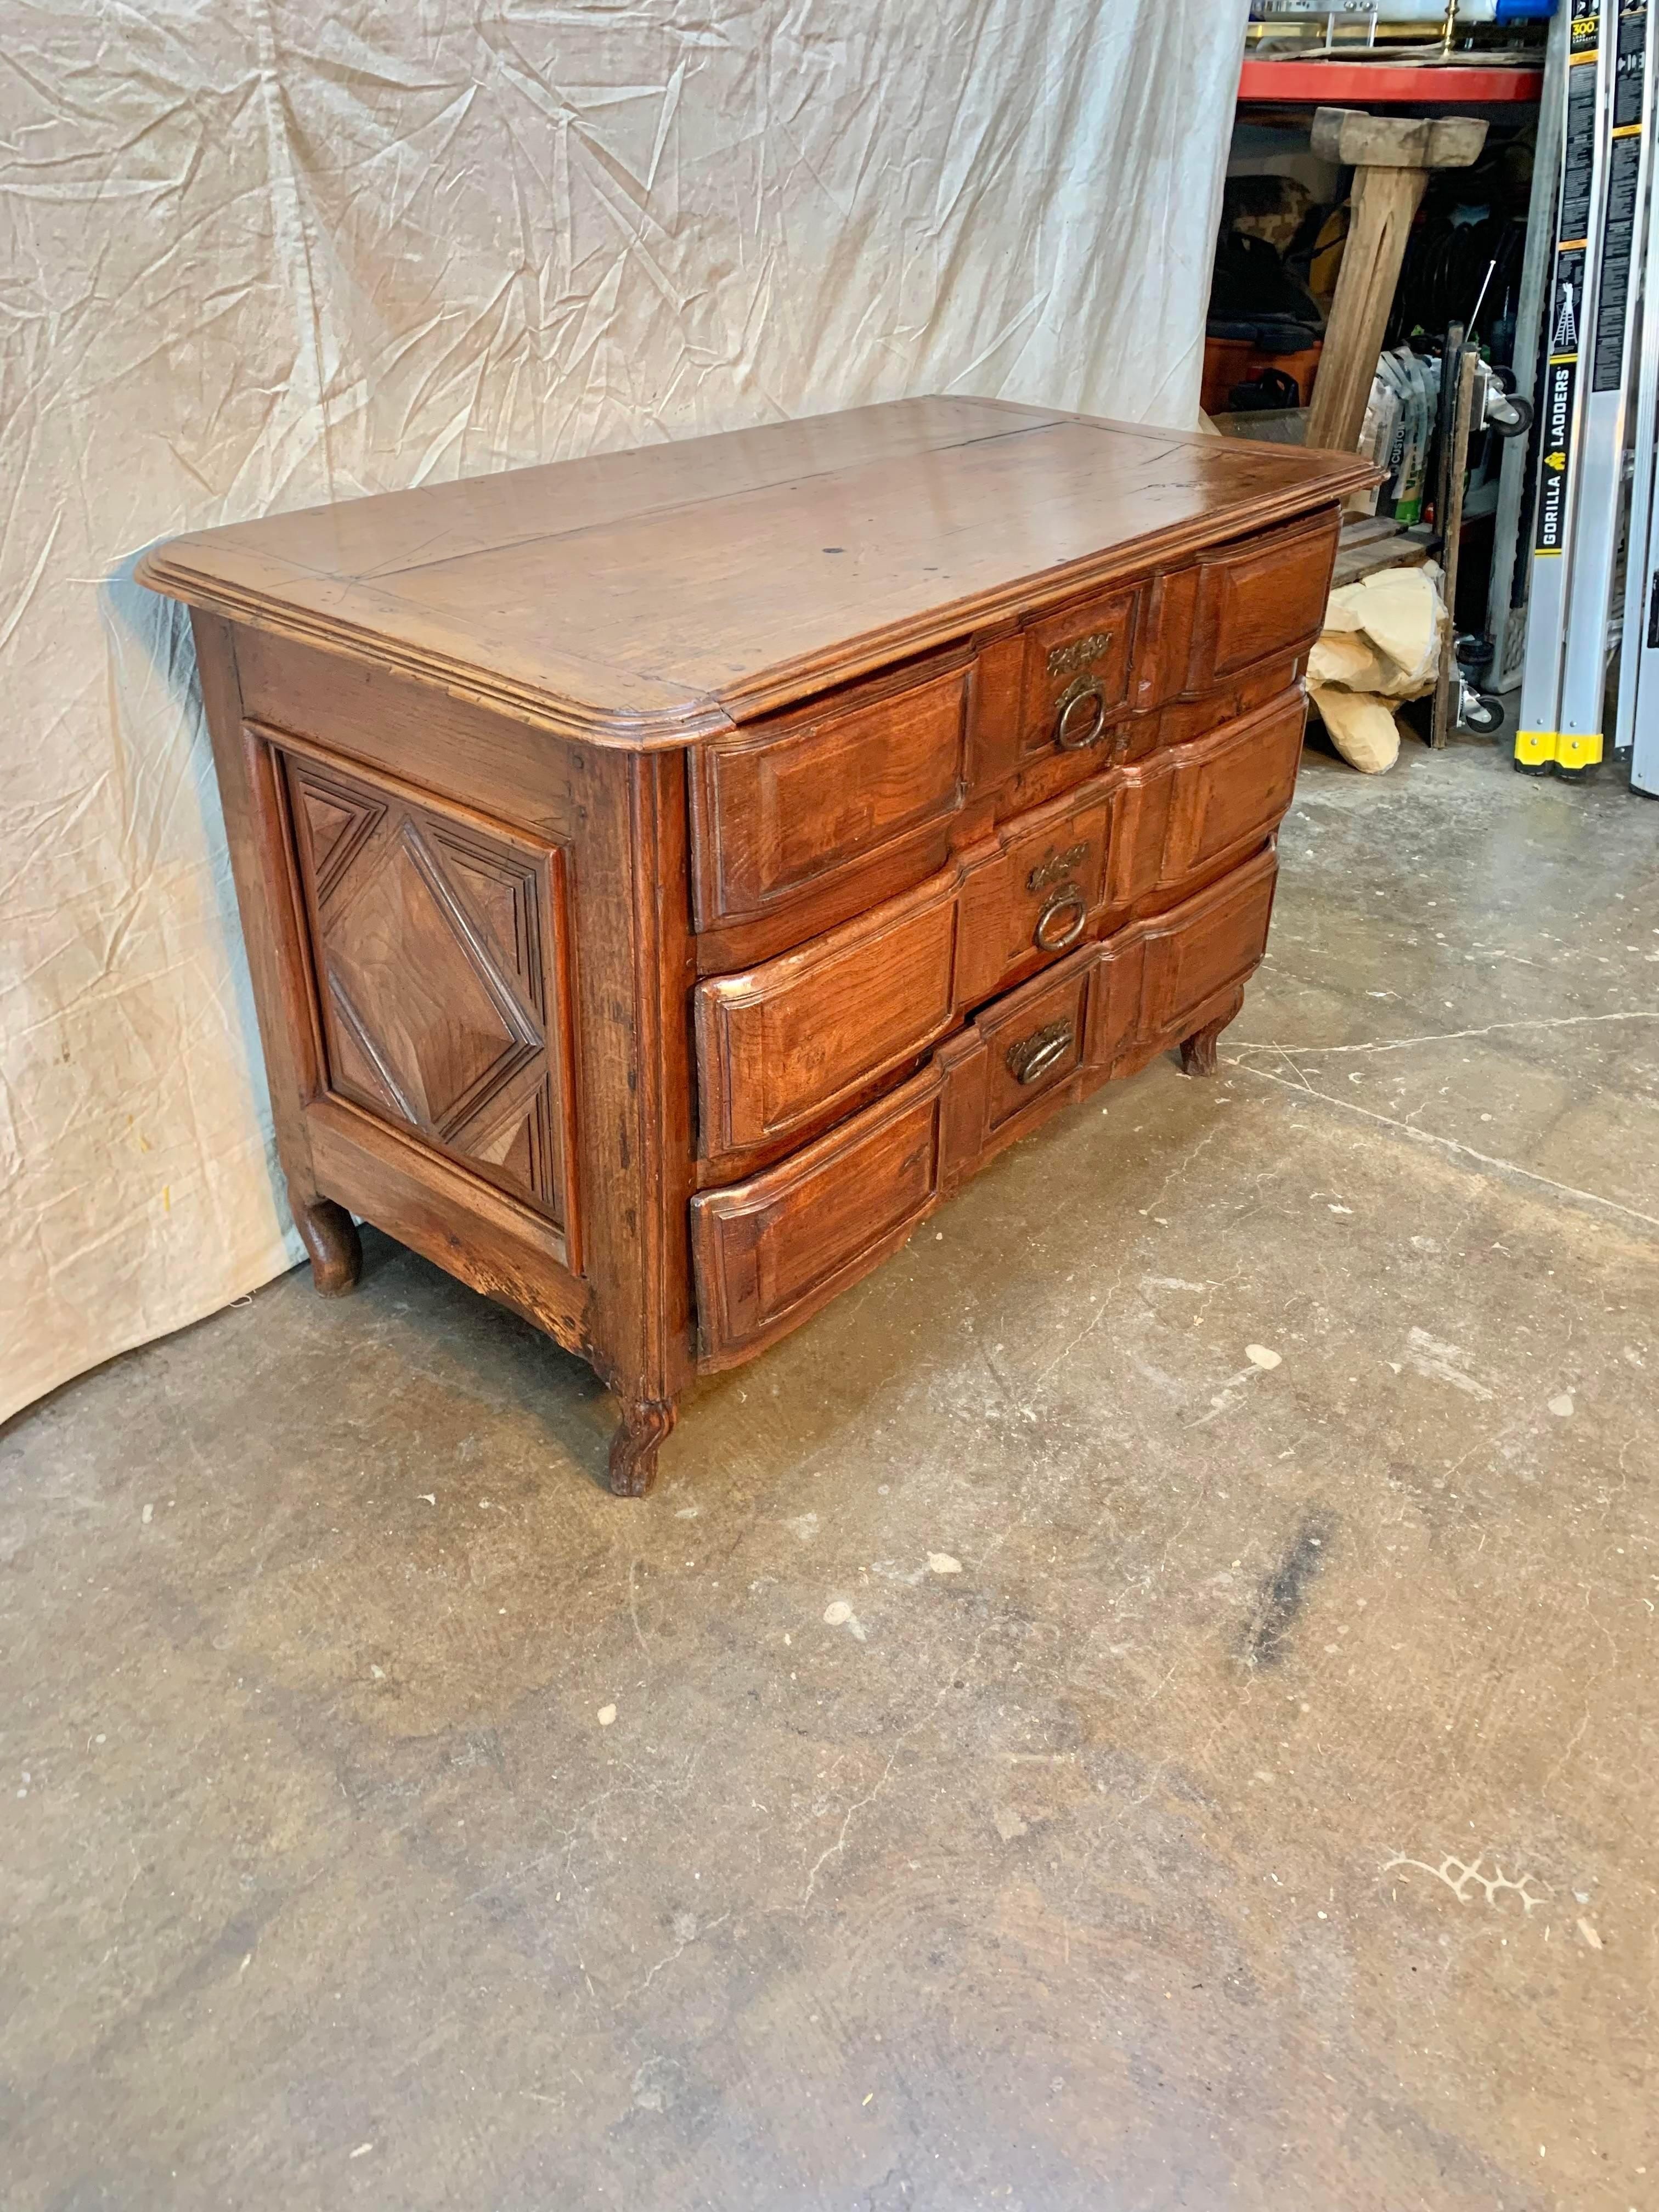 This exceptional 17th century French Louis XIII commode was handcrafted from solid old growth French oak by talented rural artisans in Normandy that were skilled in the ways of woodworking, yet using more rudimentary hand tools than were available